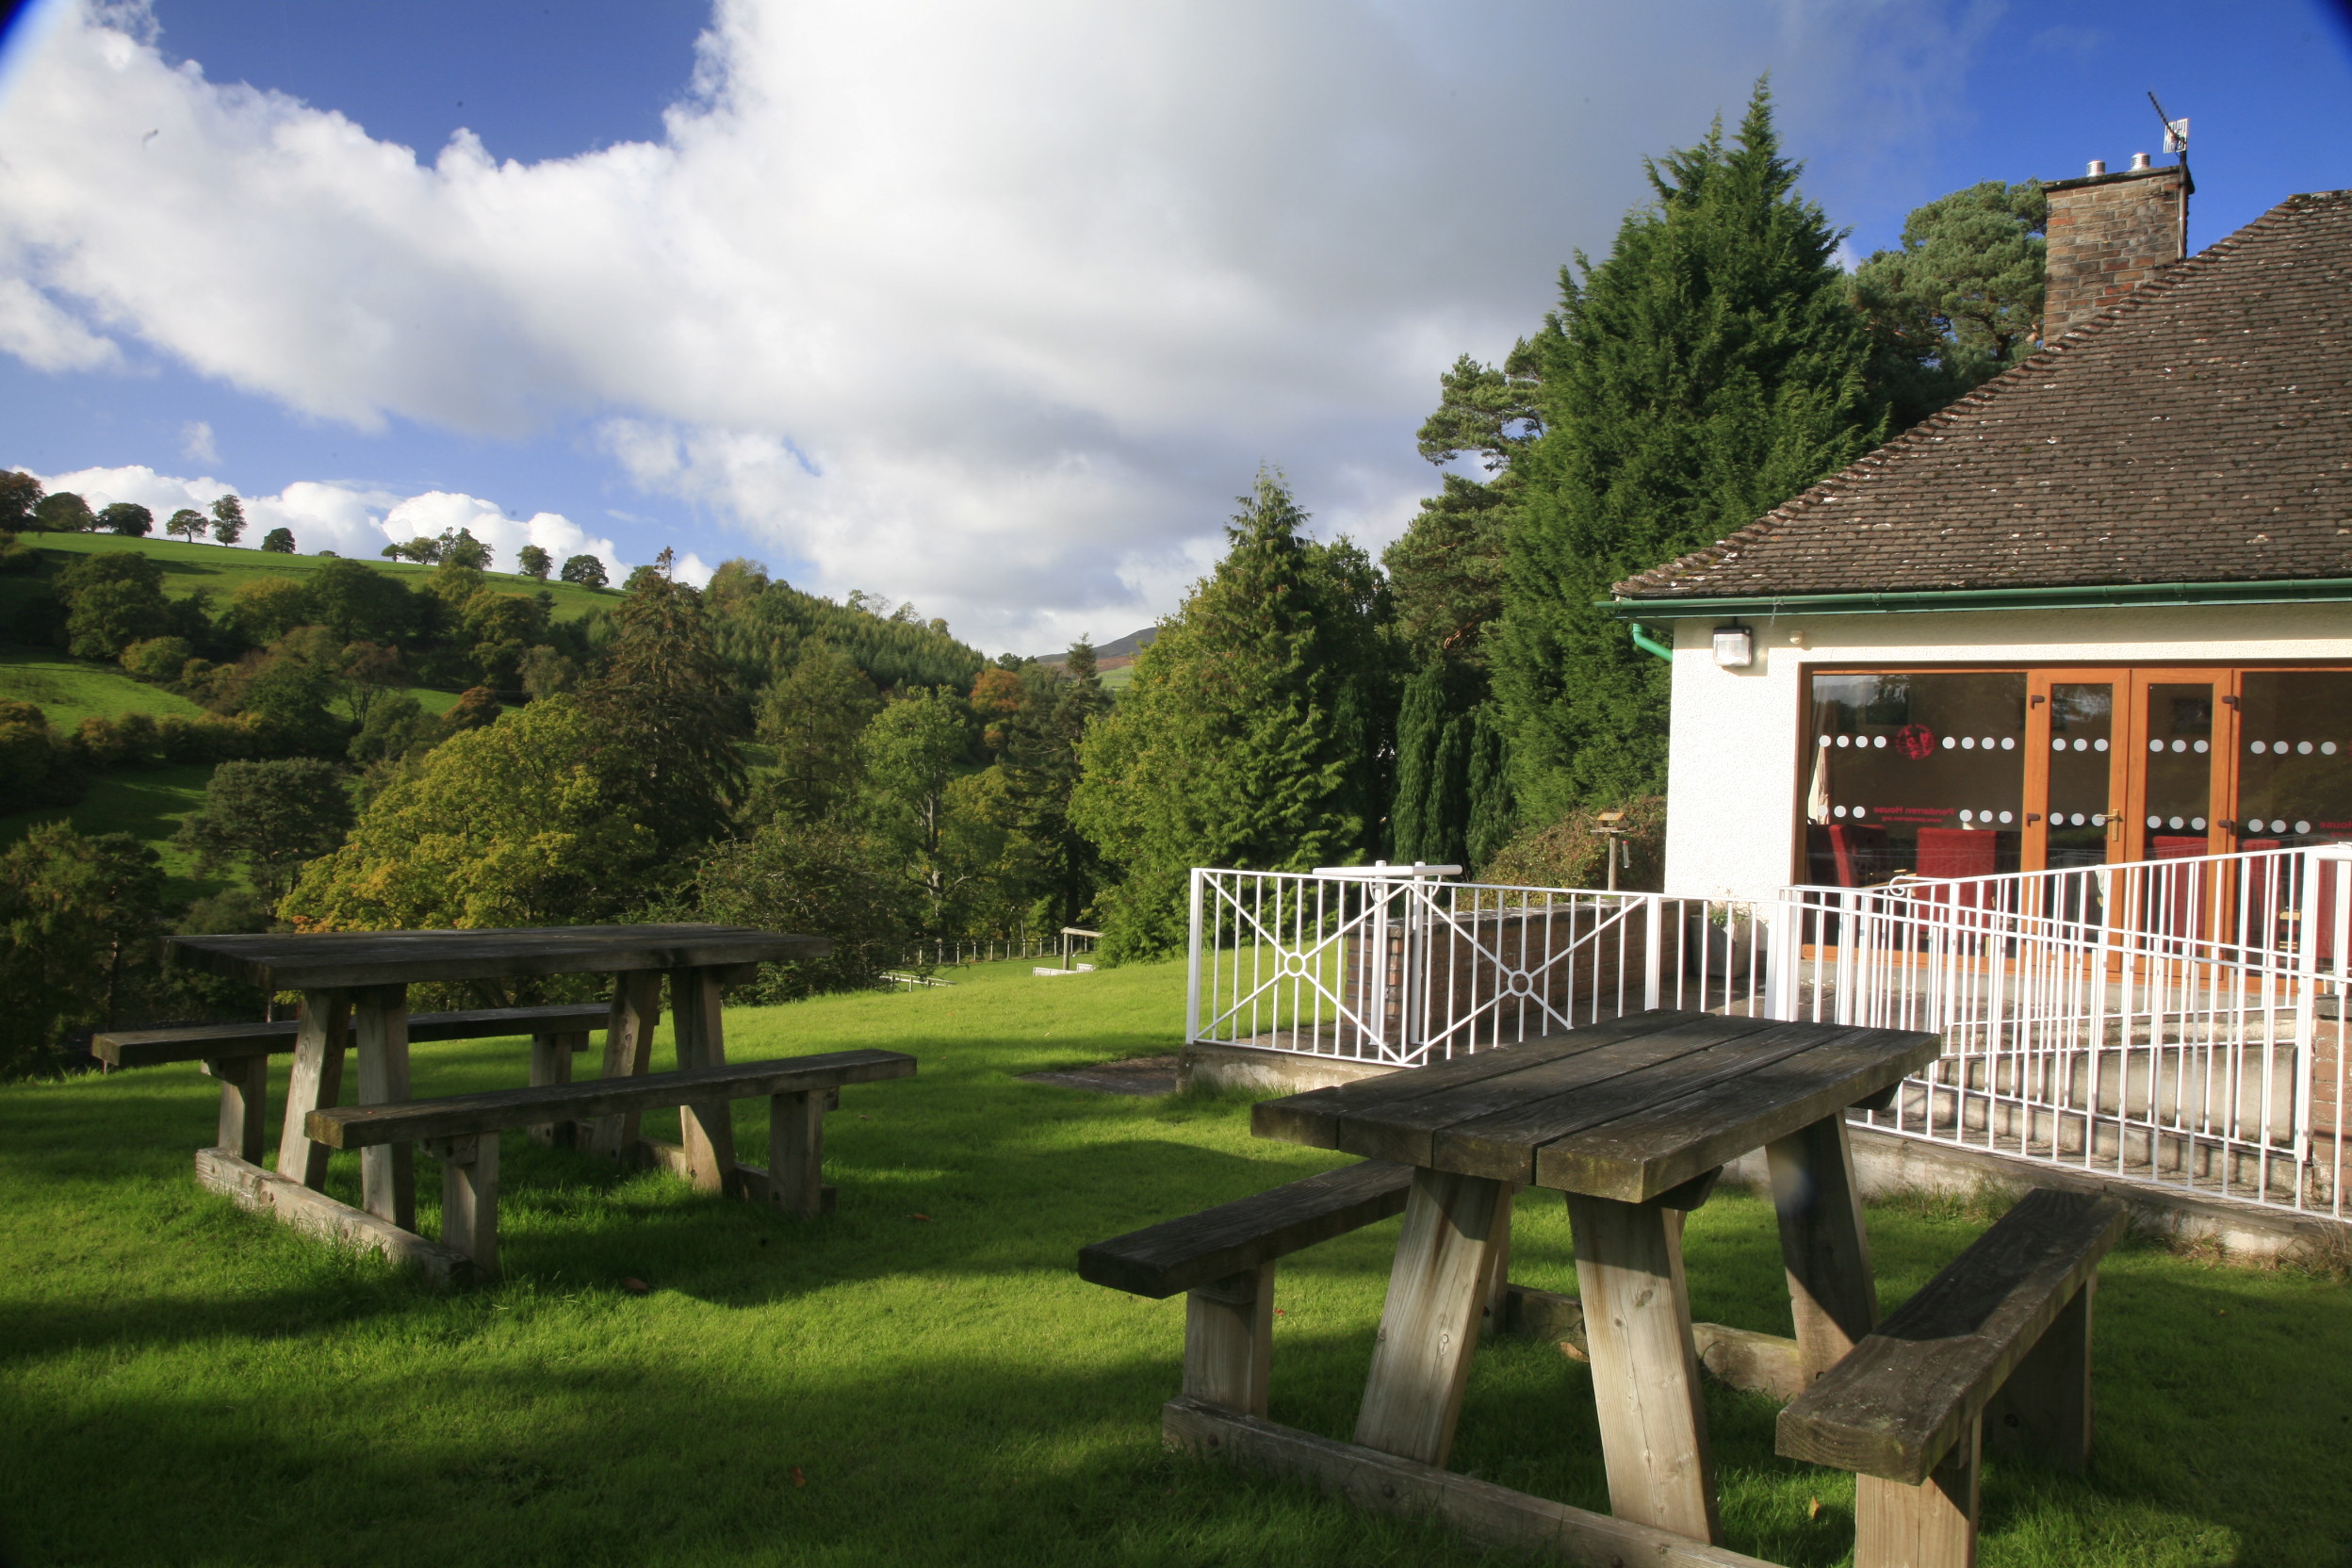 The Firs at Pendarren House - outside picnic benches